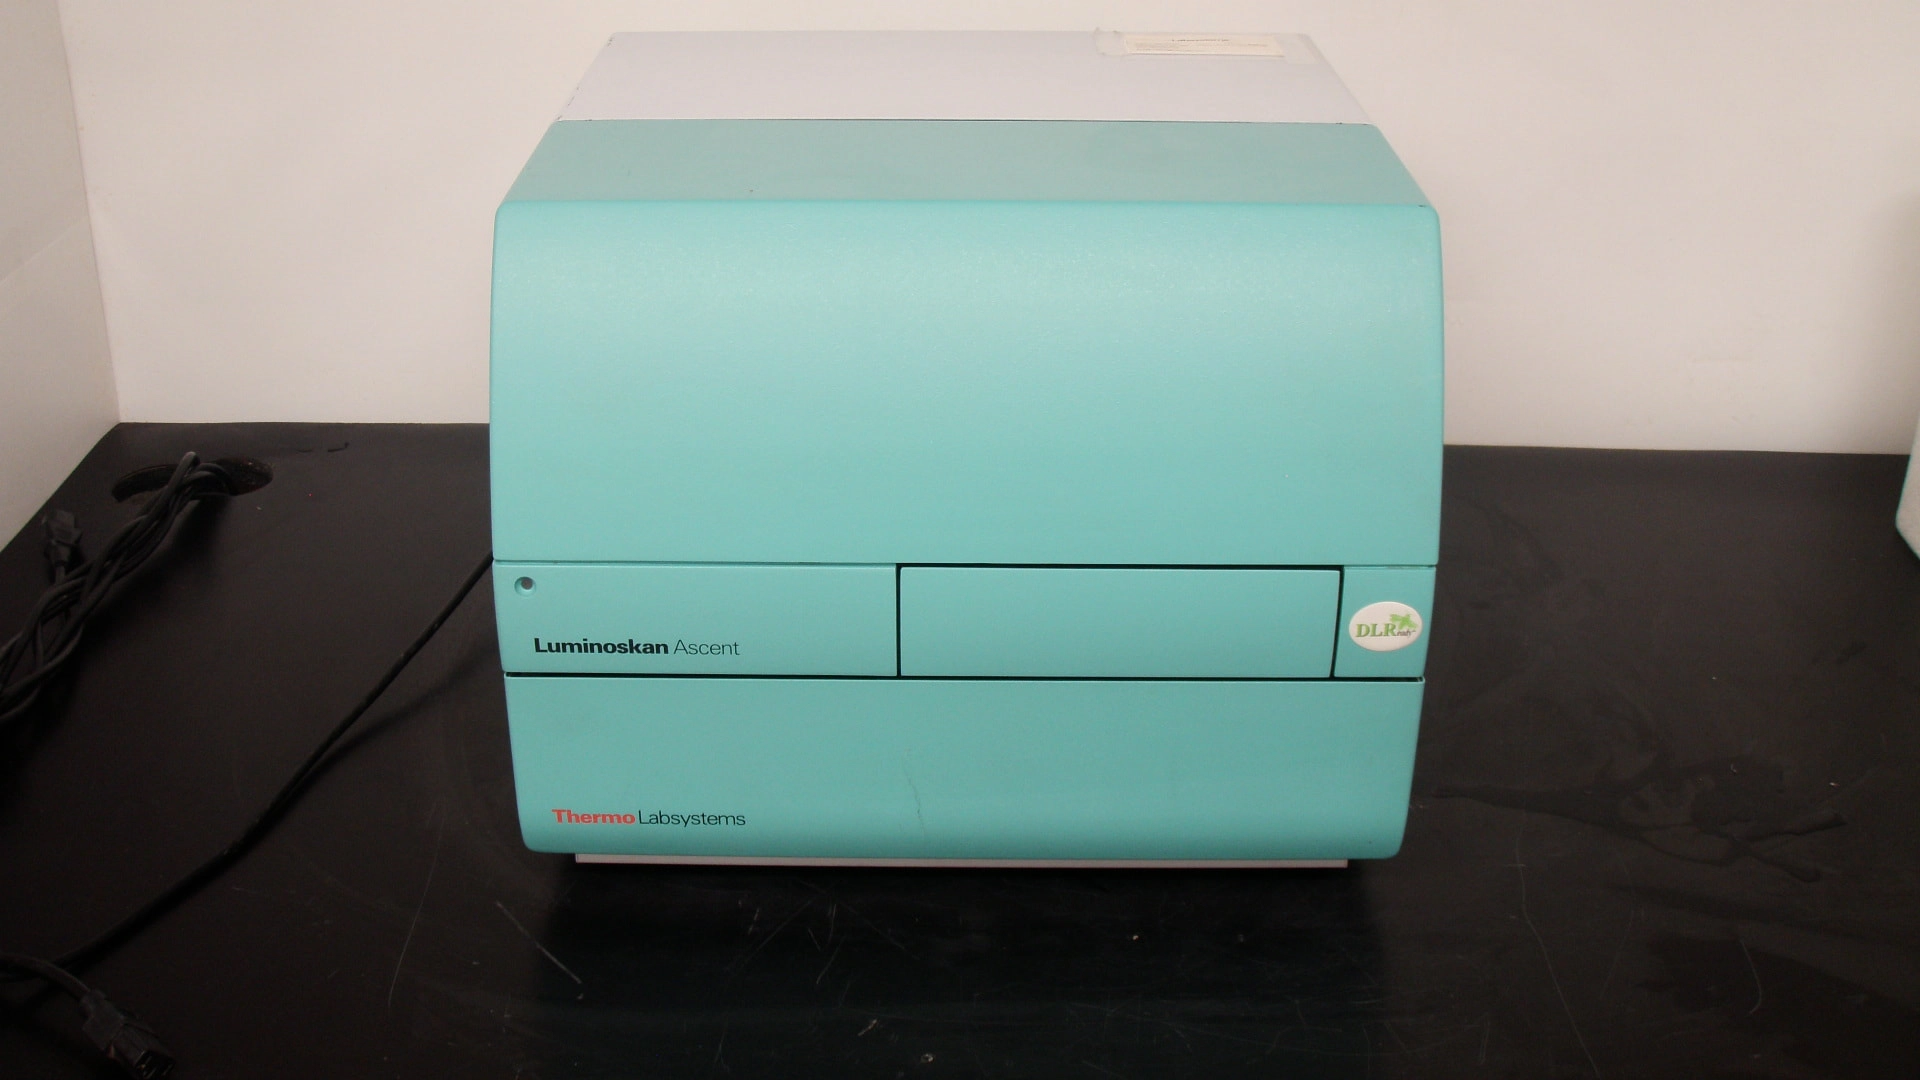 Thermo  Luminoskan Ascent Type 392 Microplate Reader